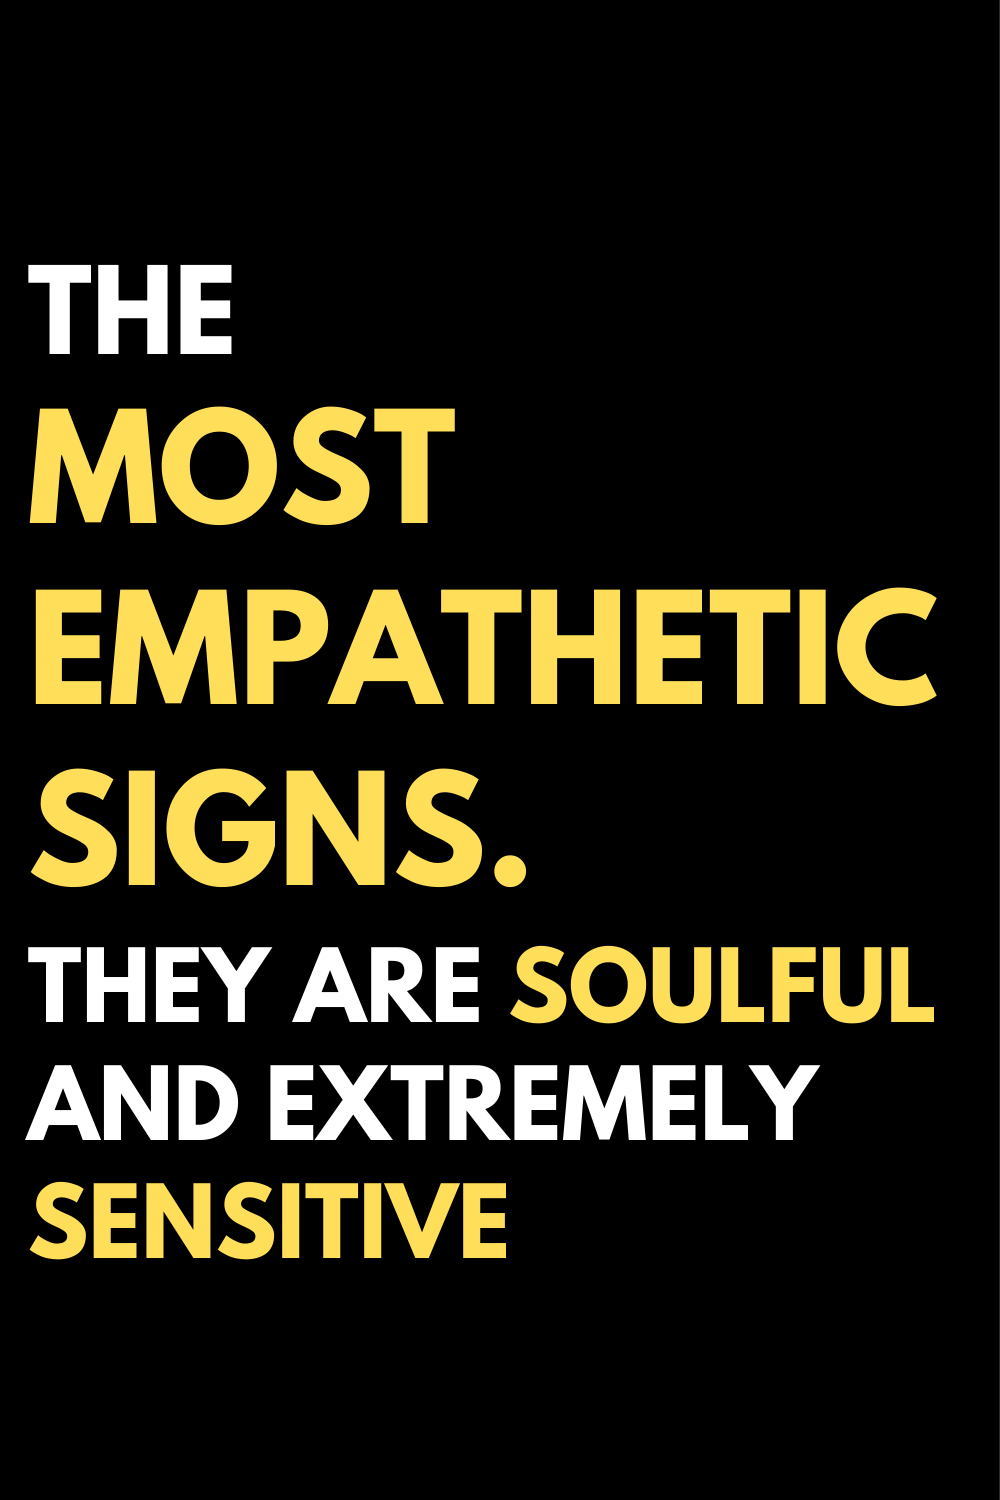 The most empathetic signs. They are soulful and extremely sensitive